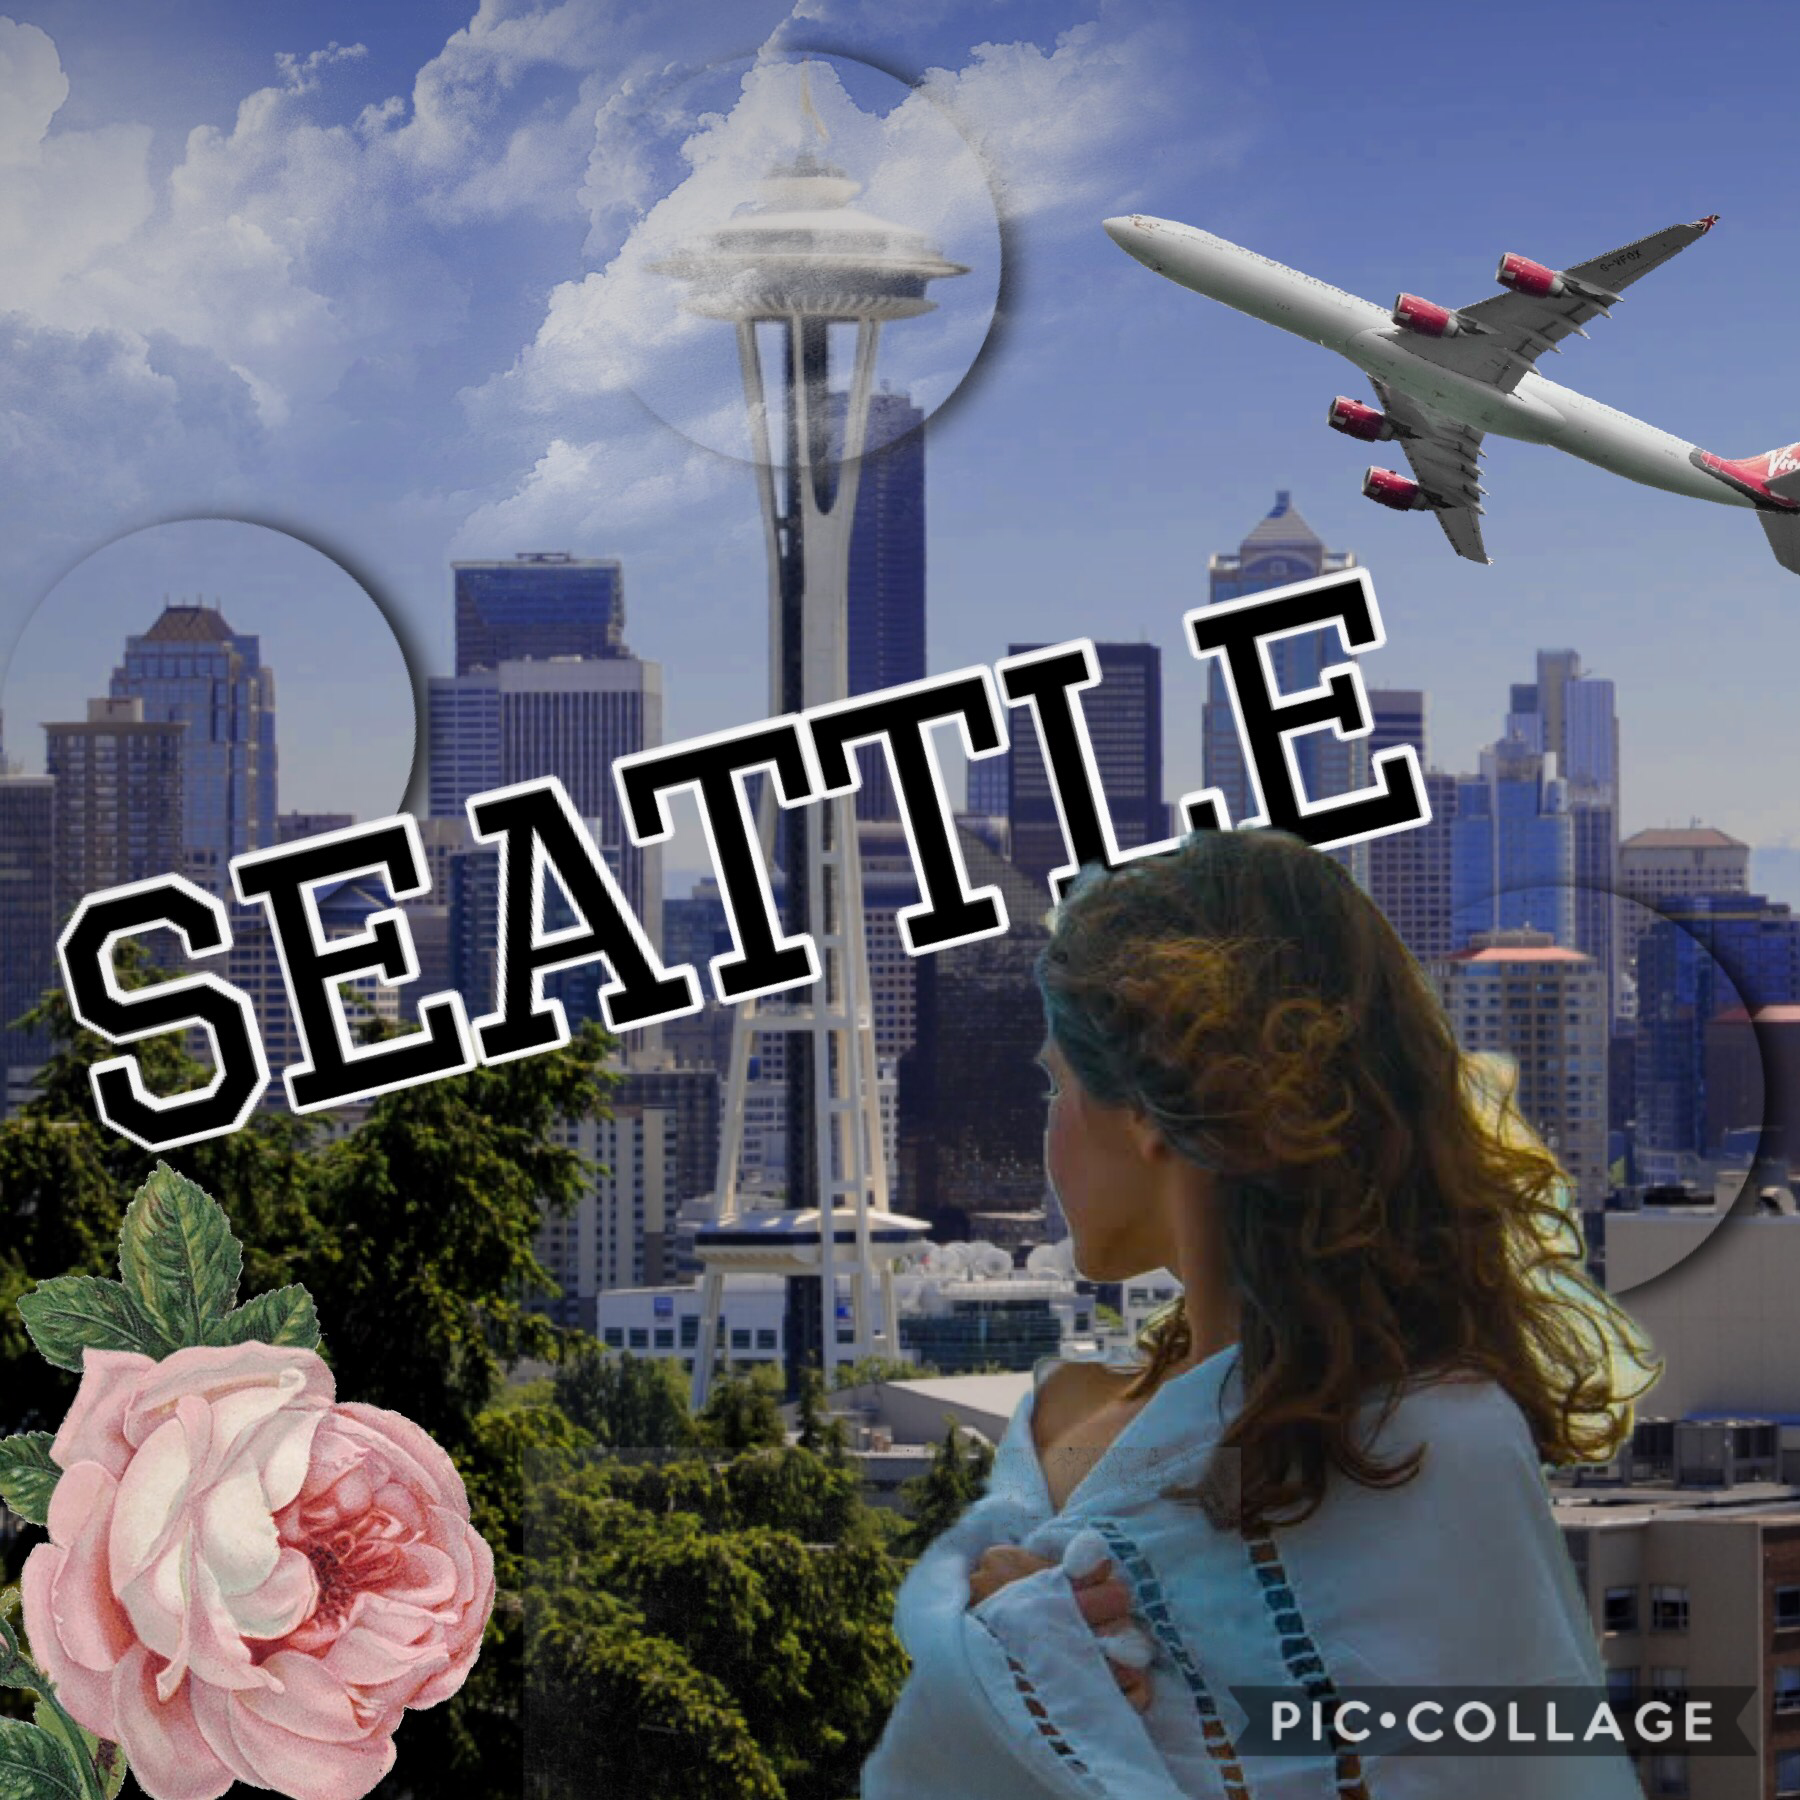 Tappyyy ❤️




I am in SEATTLE YASS! Luv y’all ❤️🤞